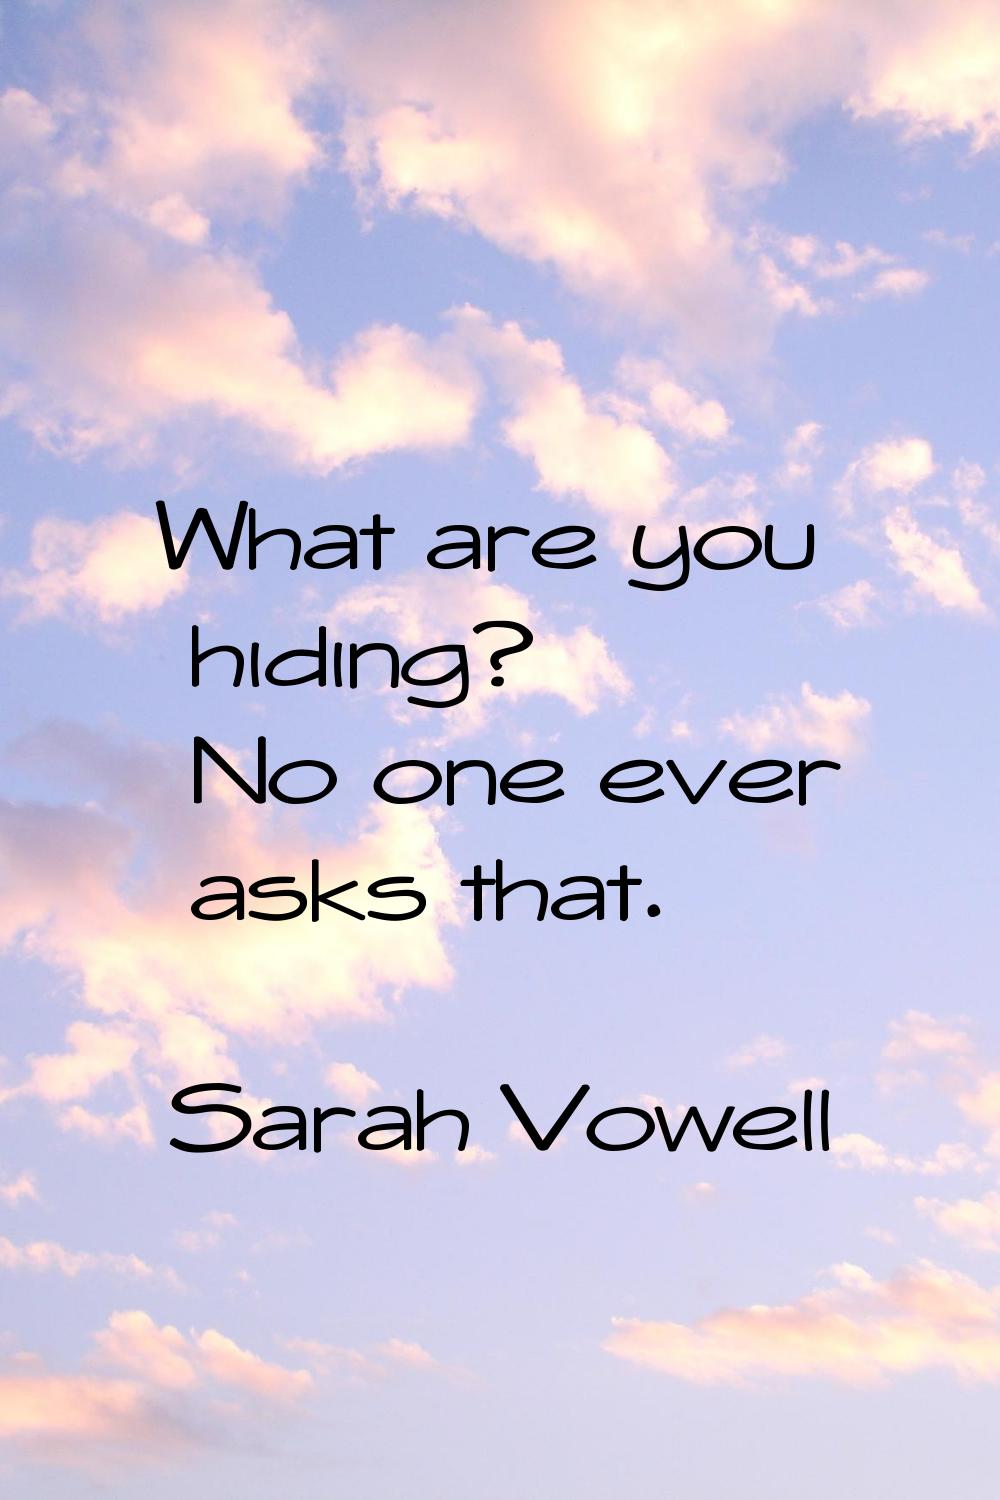 What are you hiding? No one ever asks that.